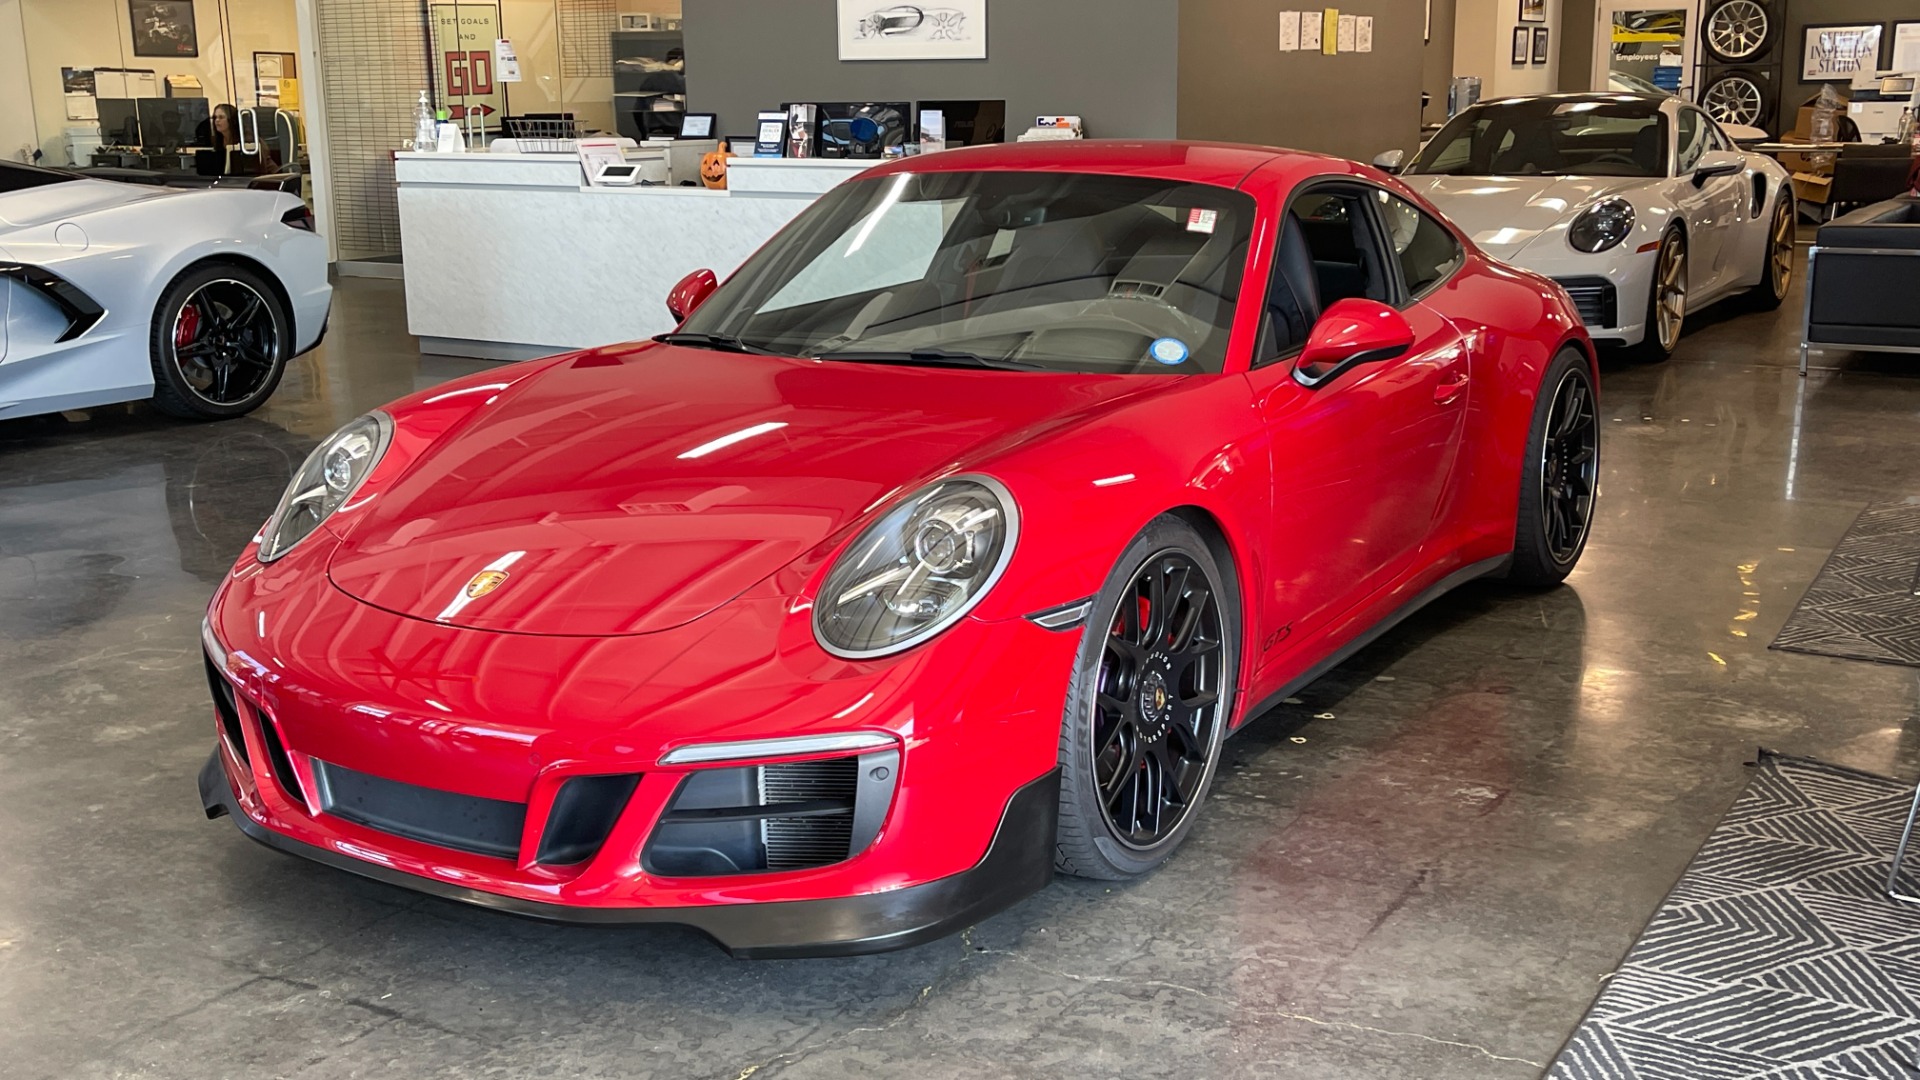 Used 2019 Porsche 911 Carrera GTS / TITANIUM EXHAUST / CARBON FIBER / TECHART SPRINGS / BBS WHEEL for sale $123,995 at Formula Imports in Charlotte NC 28227 3